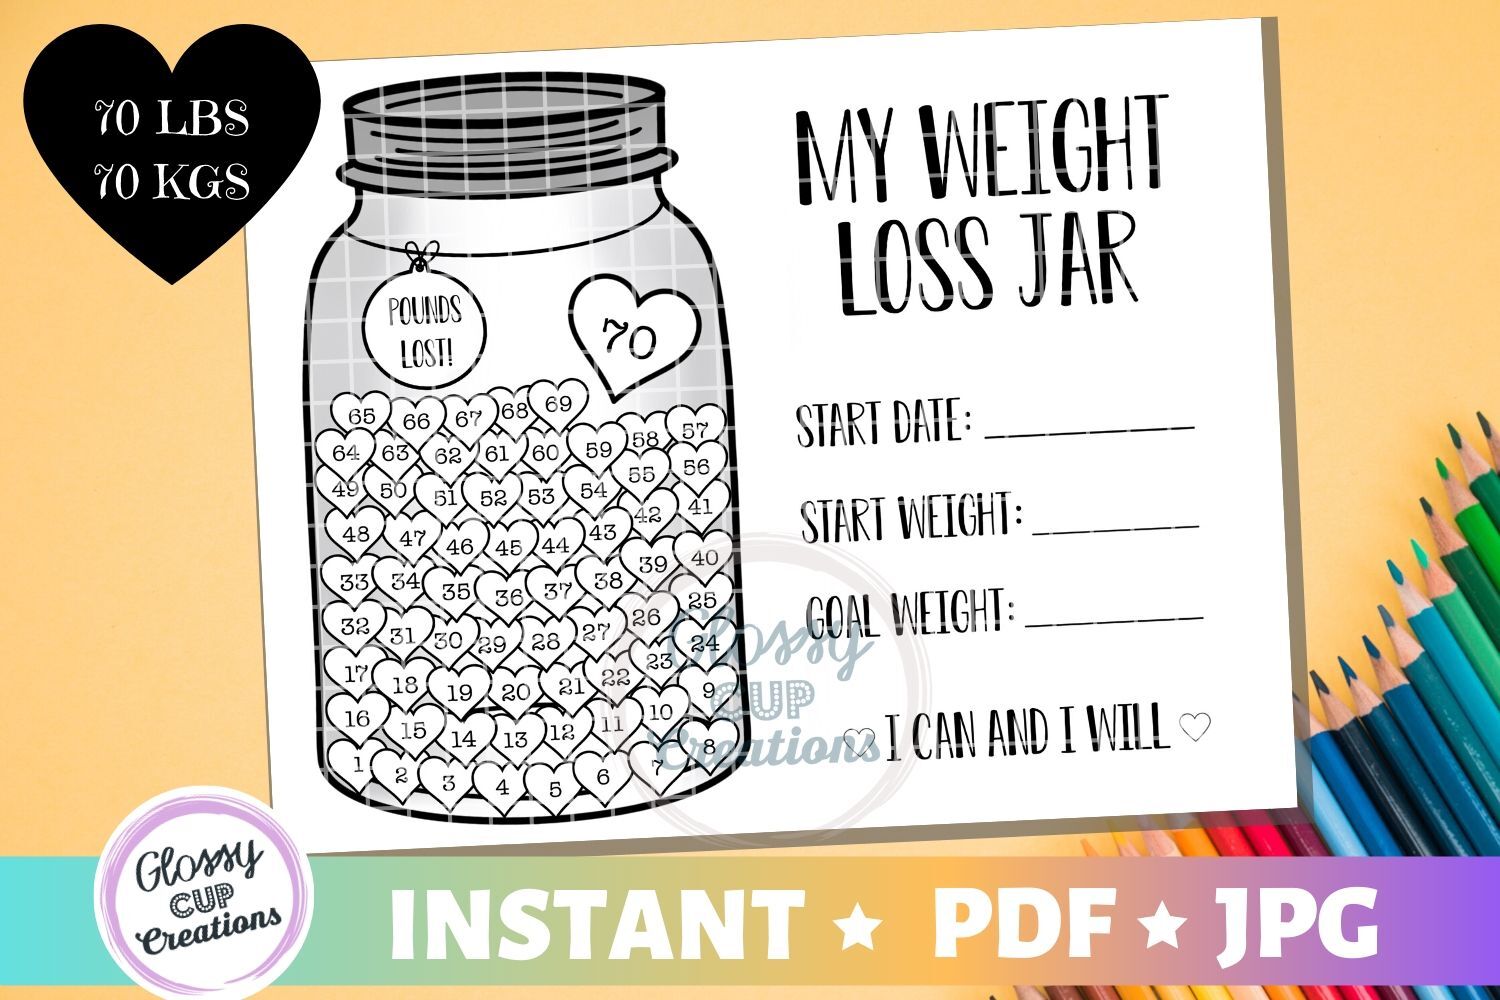 My Weight Loss Jar 70 lbs, JPG, PDF, Printable Coloring Page! By Glossy Cup  Creations